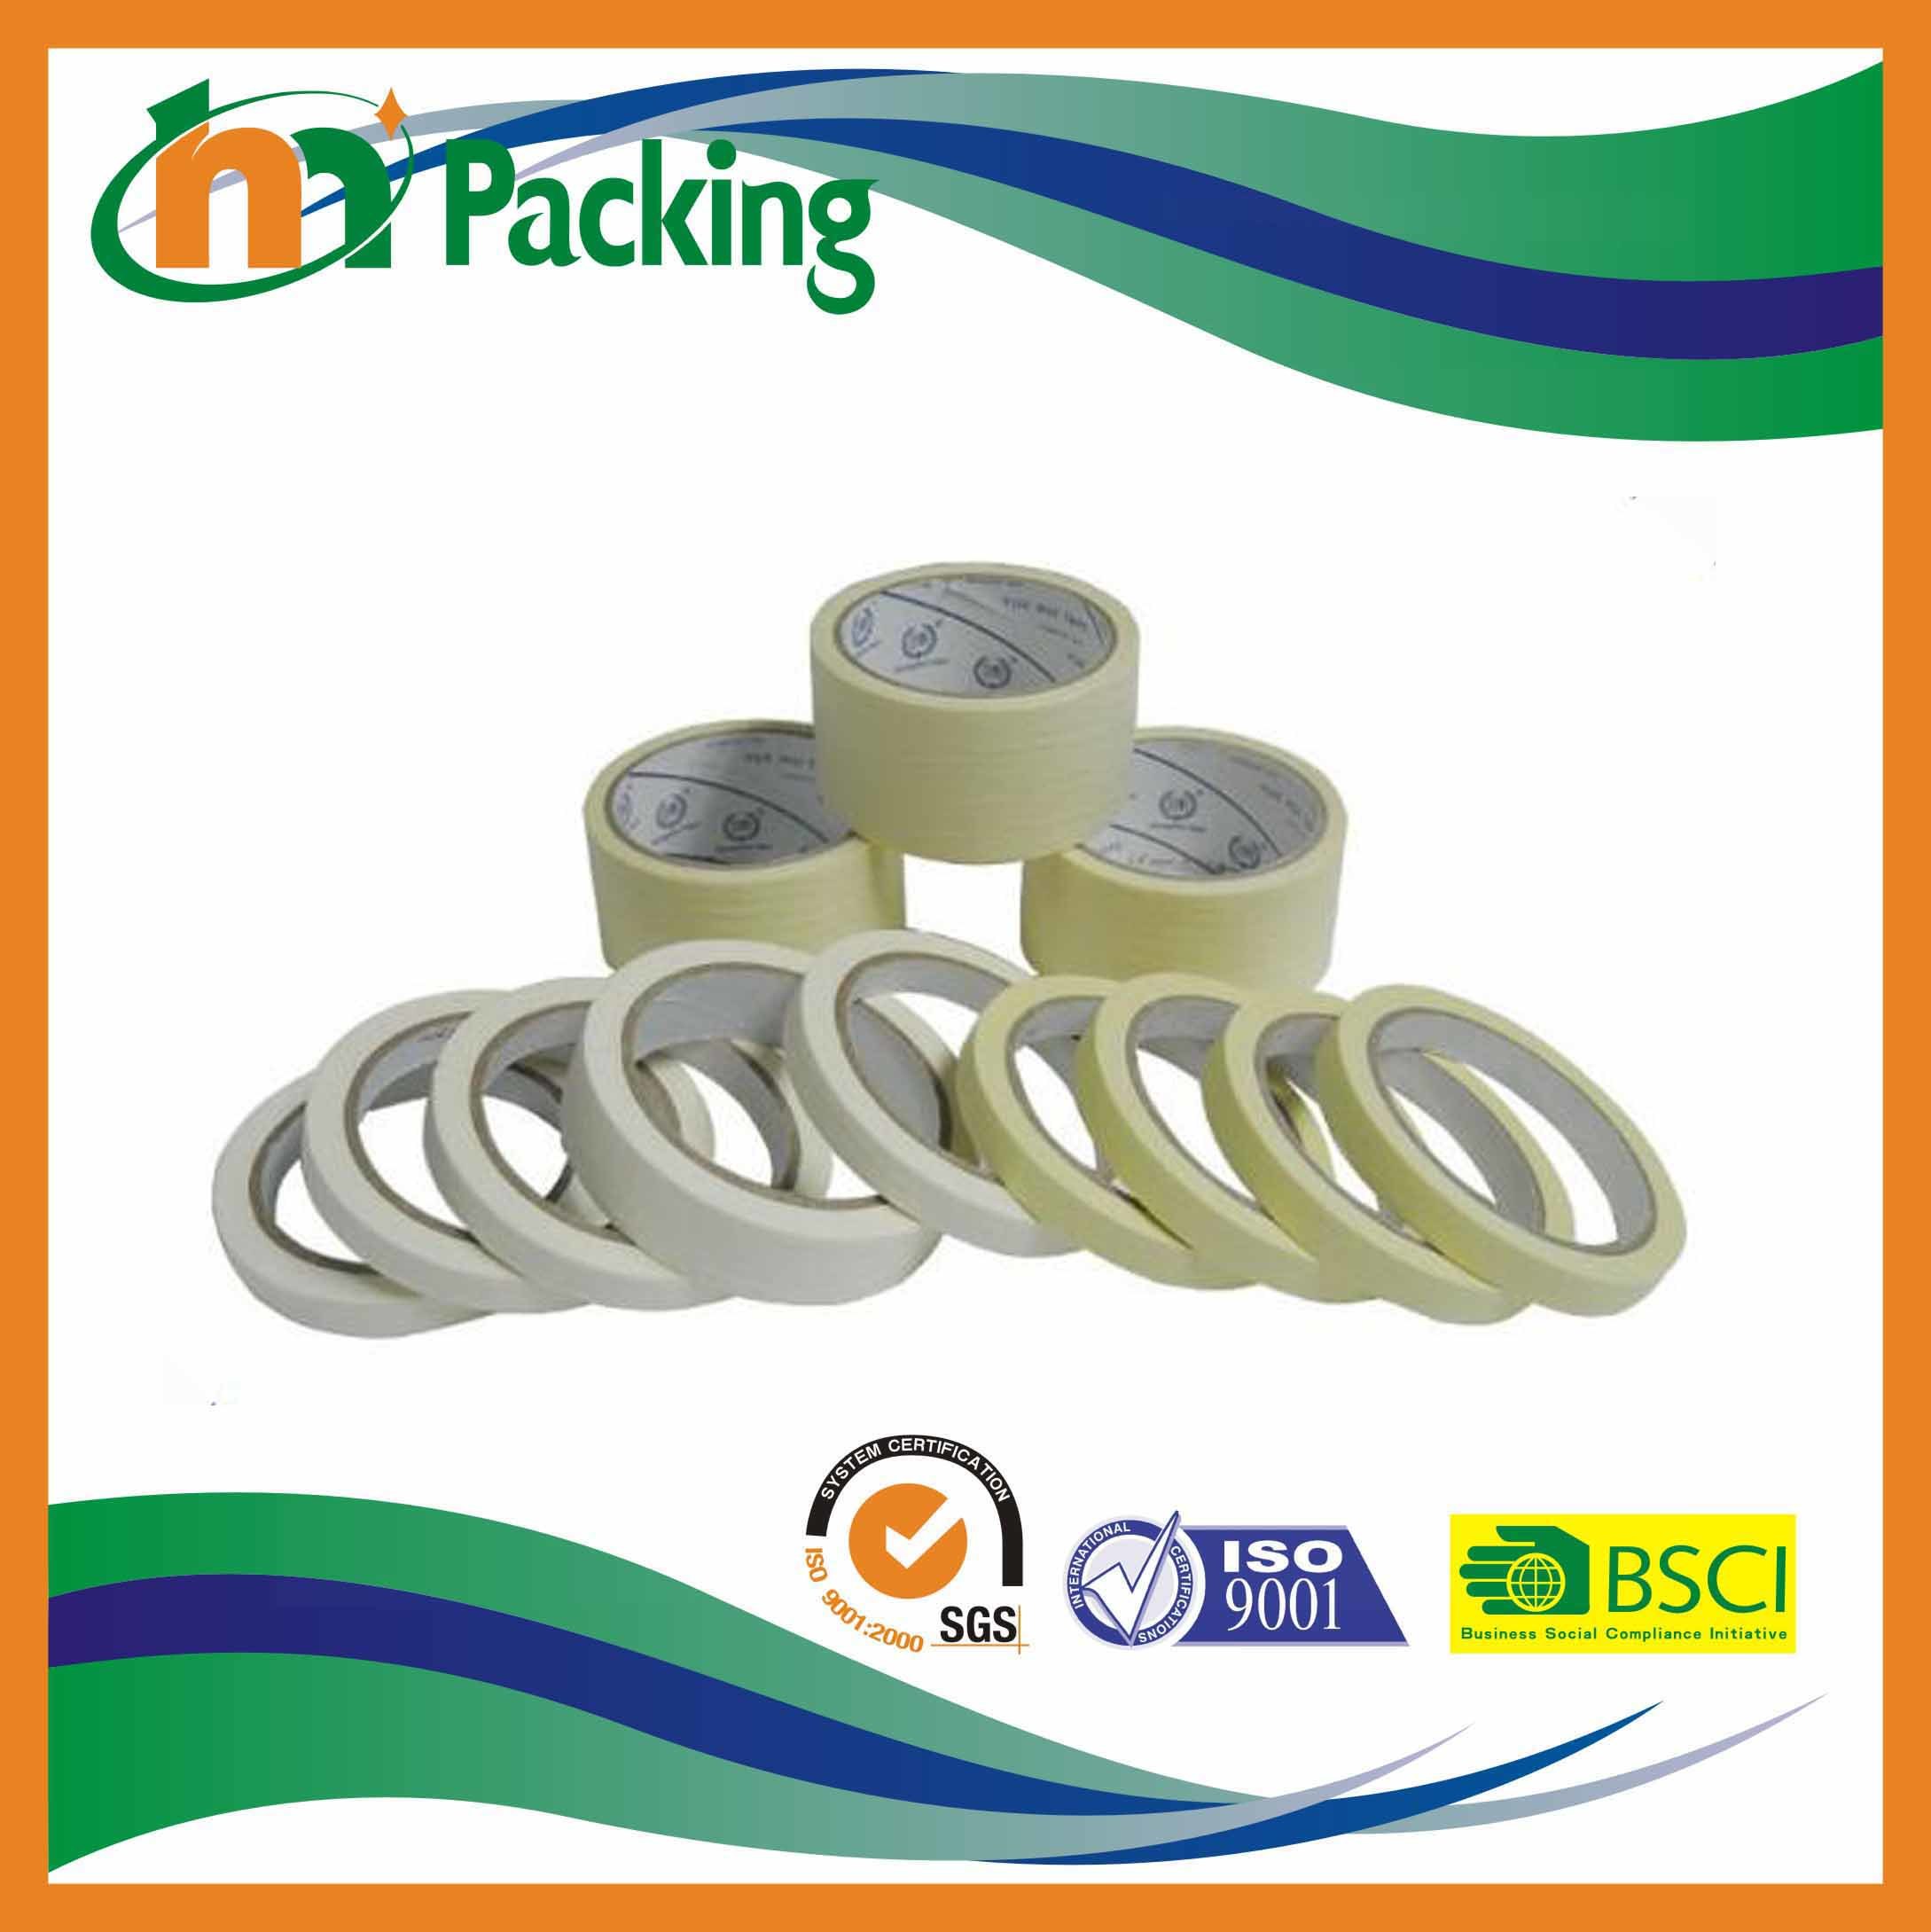 High Temperature Resistance Crepe Paper Masking Tape for Car Painting